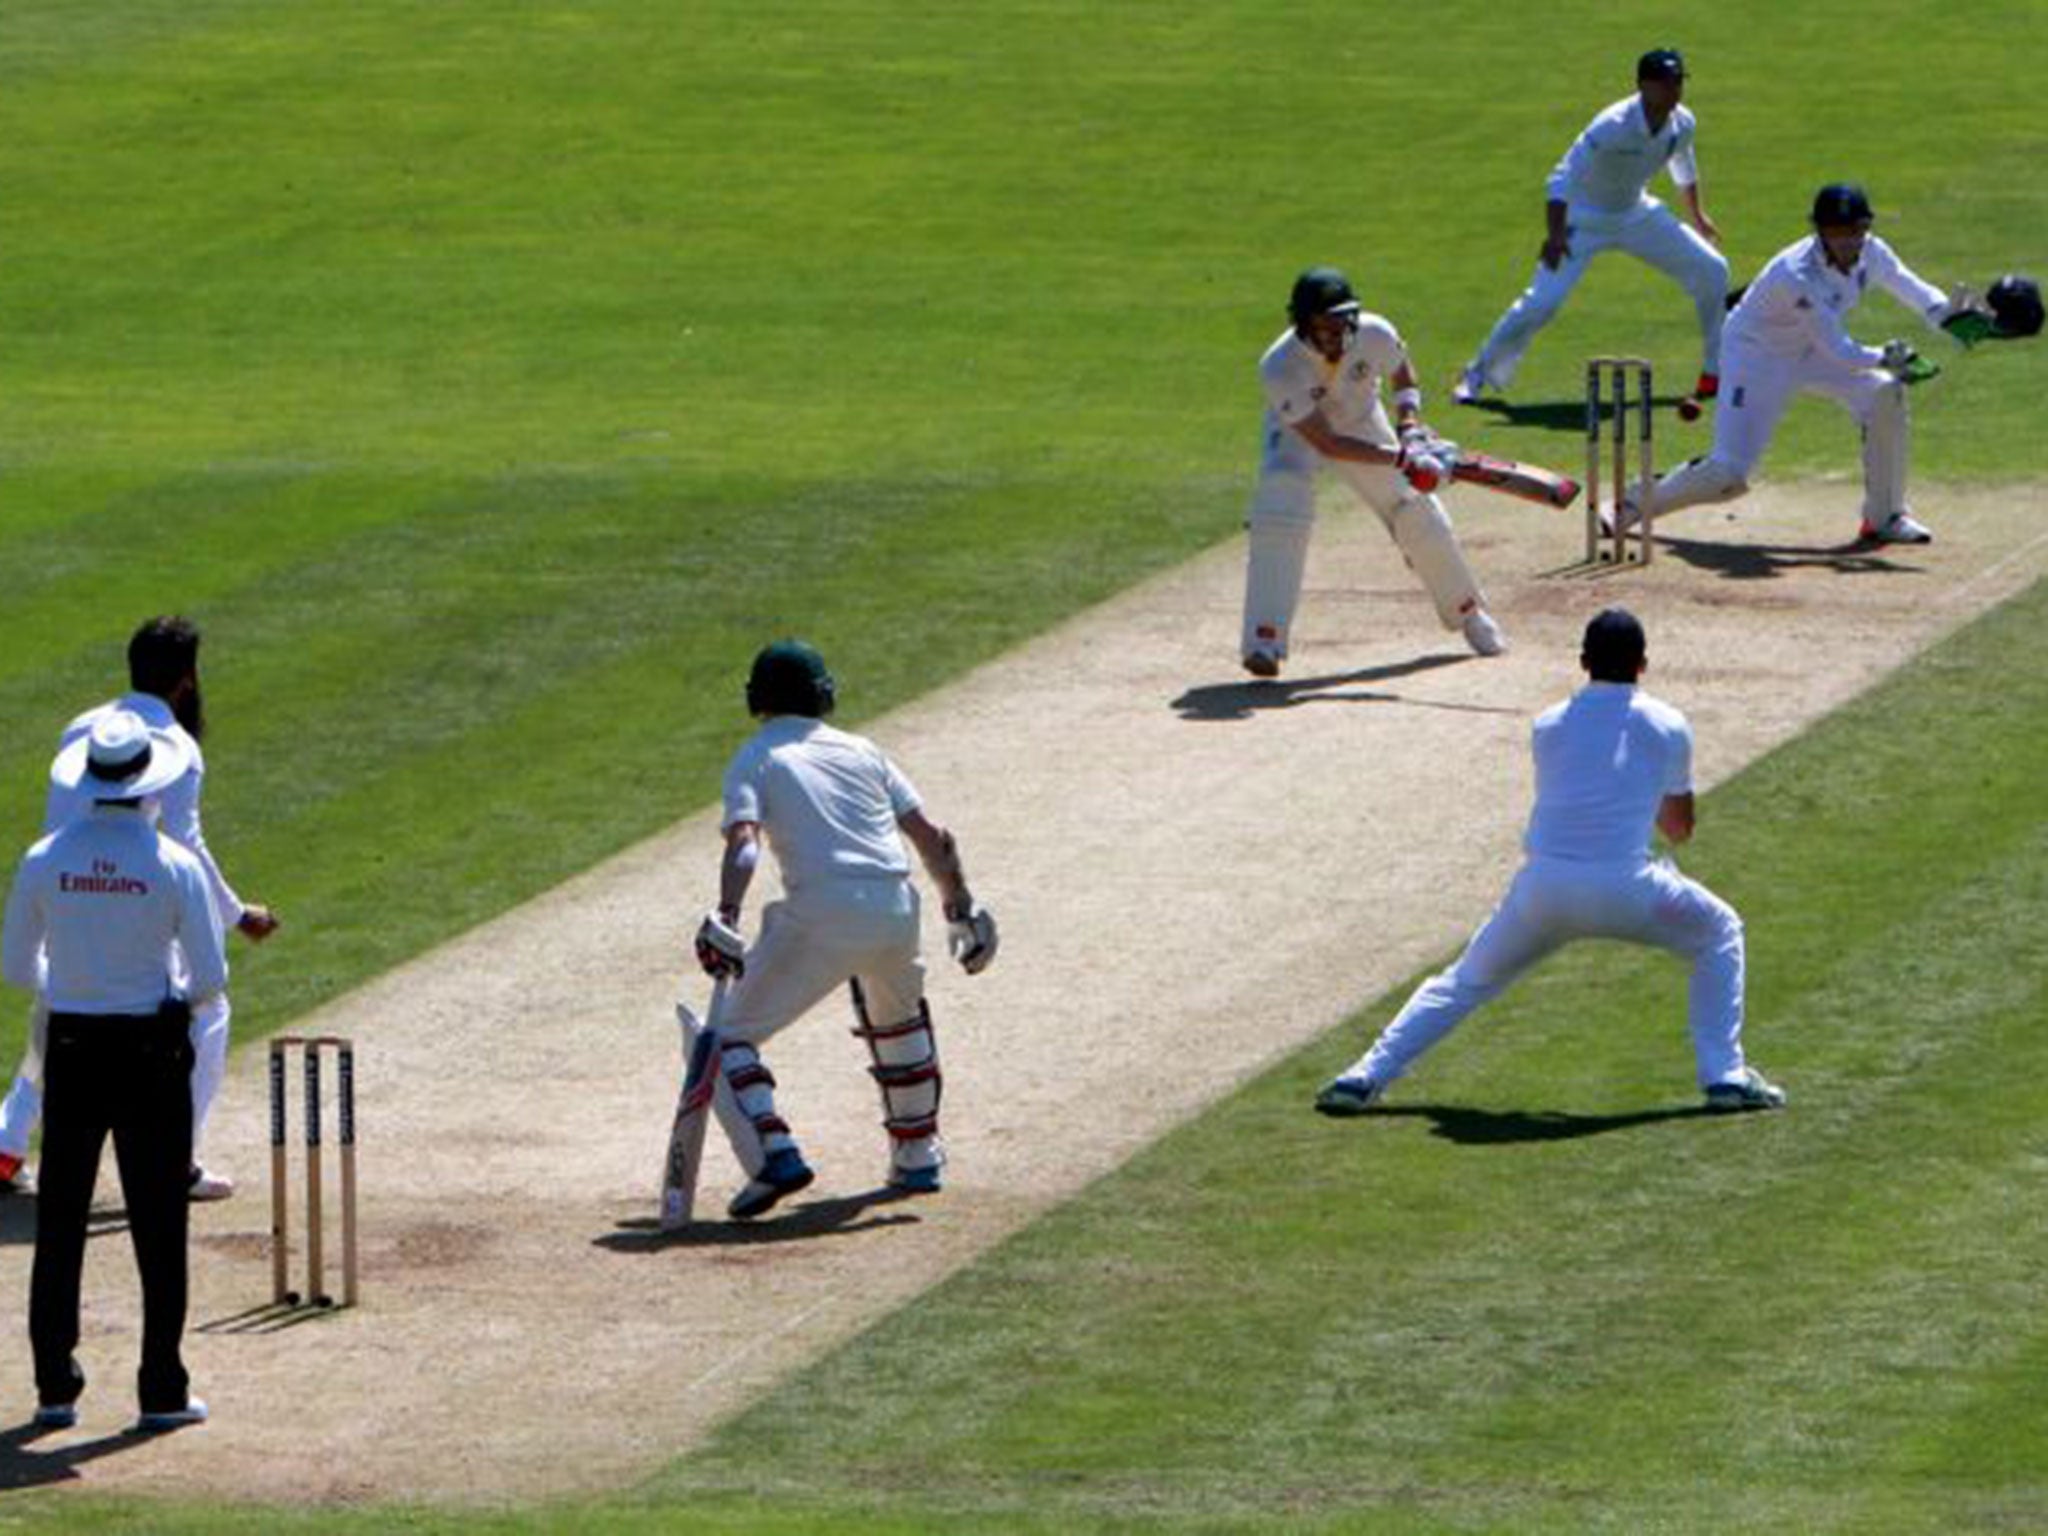 Australia batsman Steve Smith is caught for 33 by England’s Alastair Cook, front right, off the bowling of Moeen Ali